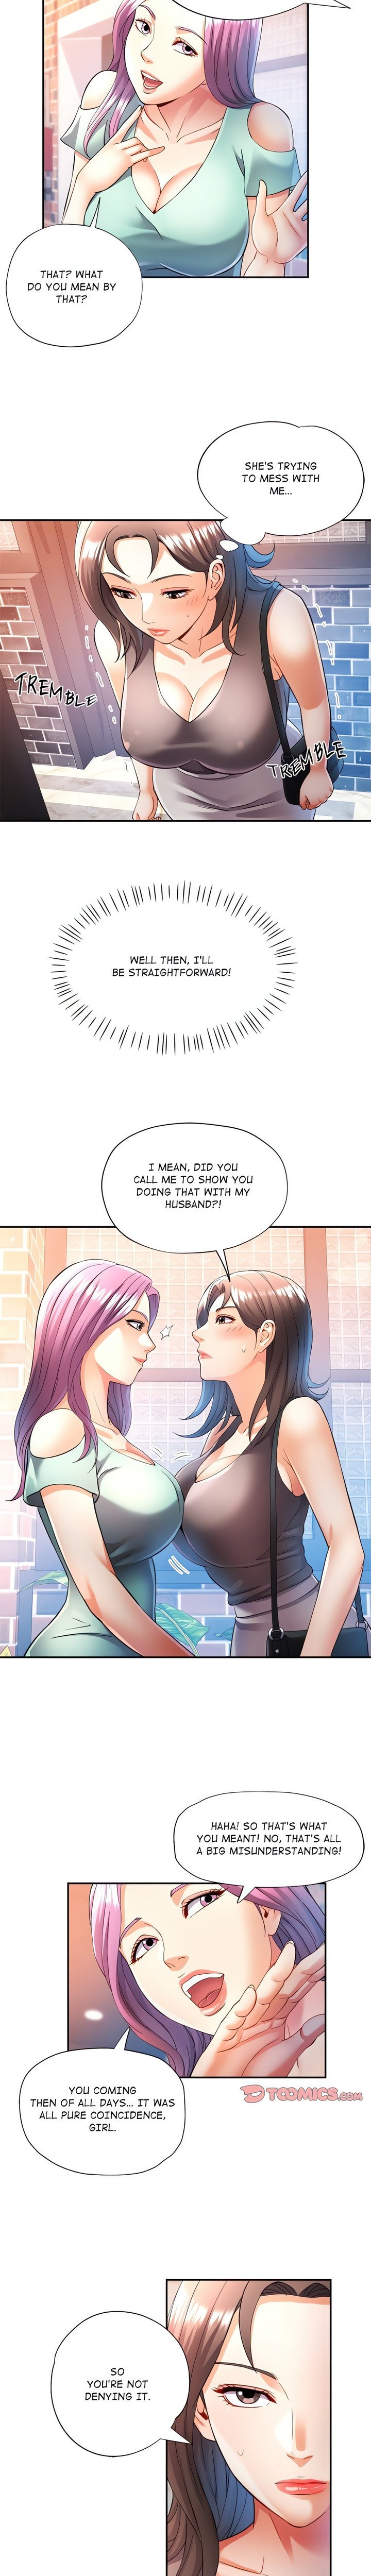 in-her-place-chap-26-7